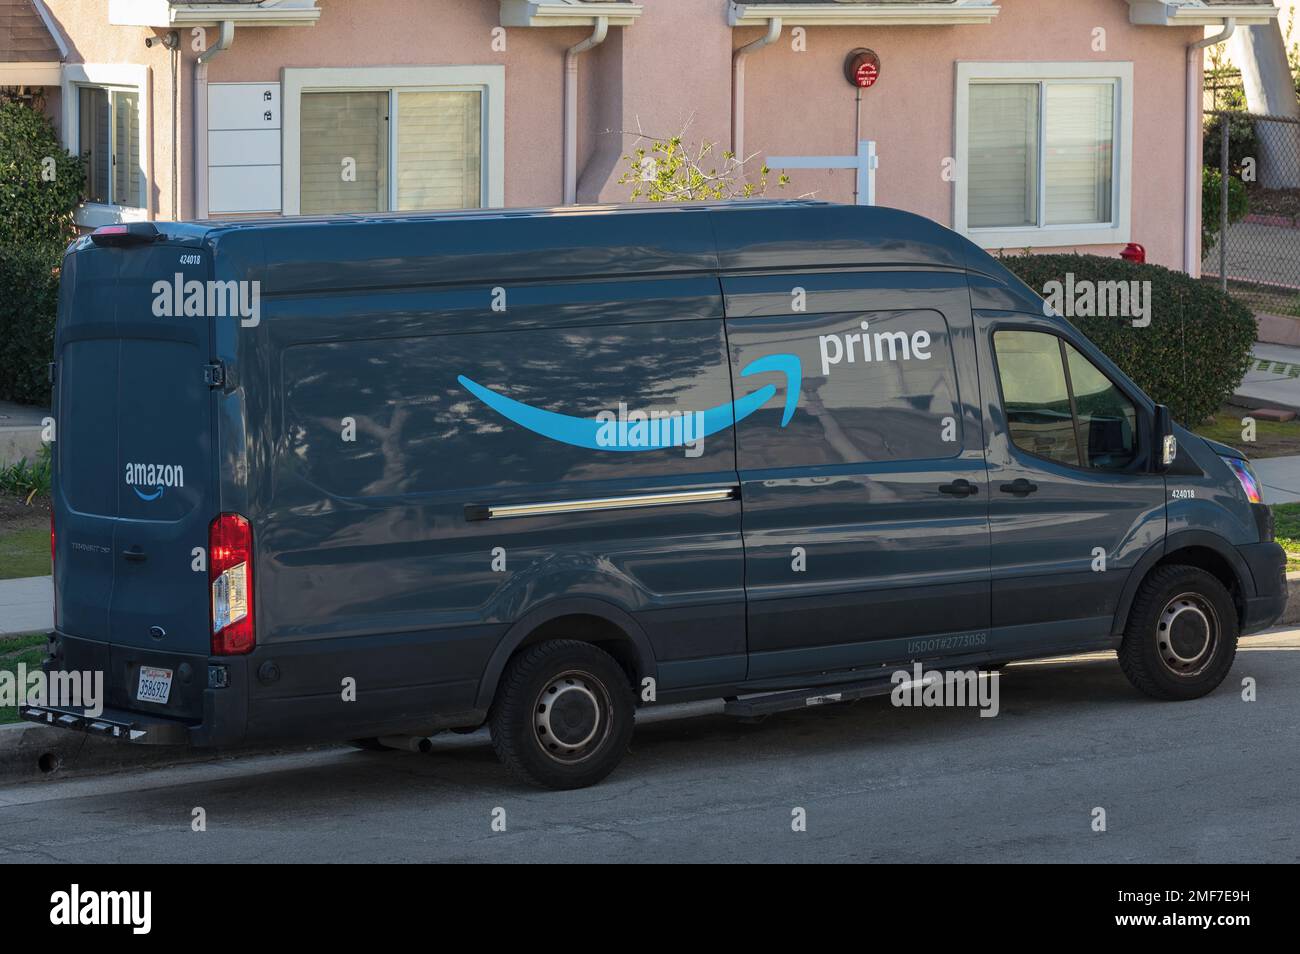 Pasadena, California, United States - January 24, 2023: Amazon Prime delivery van shown parked in a residential area in the City of Pasadena, Los Ange Stock Photo